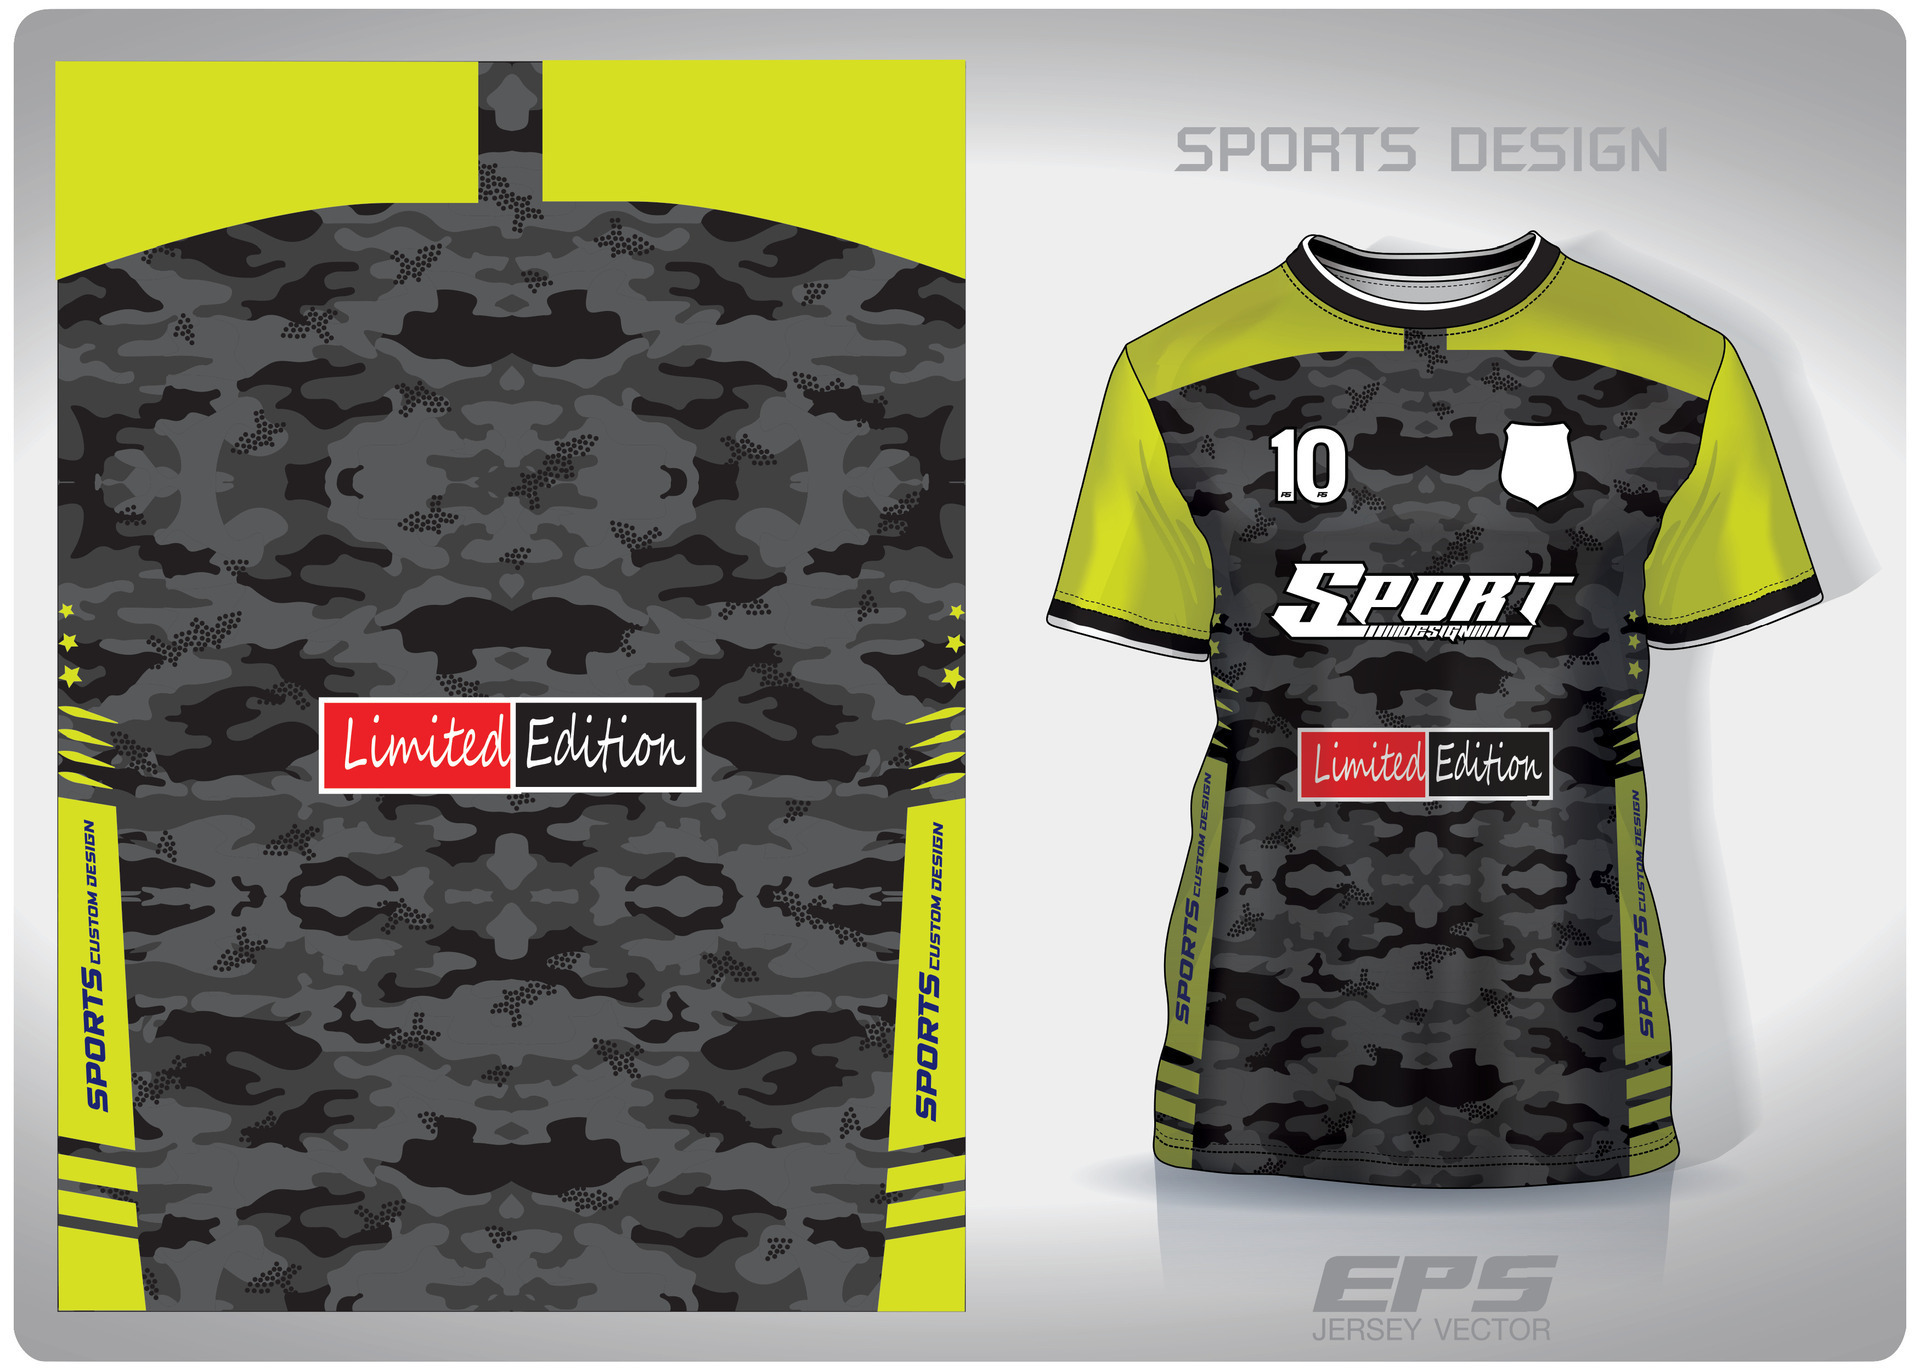 Vector sports shirt background image.Black gray camouflage with